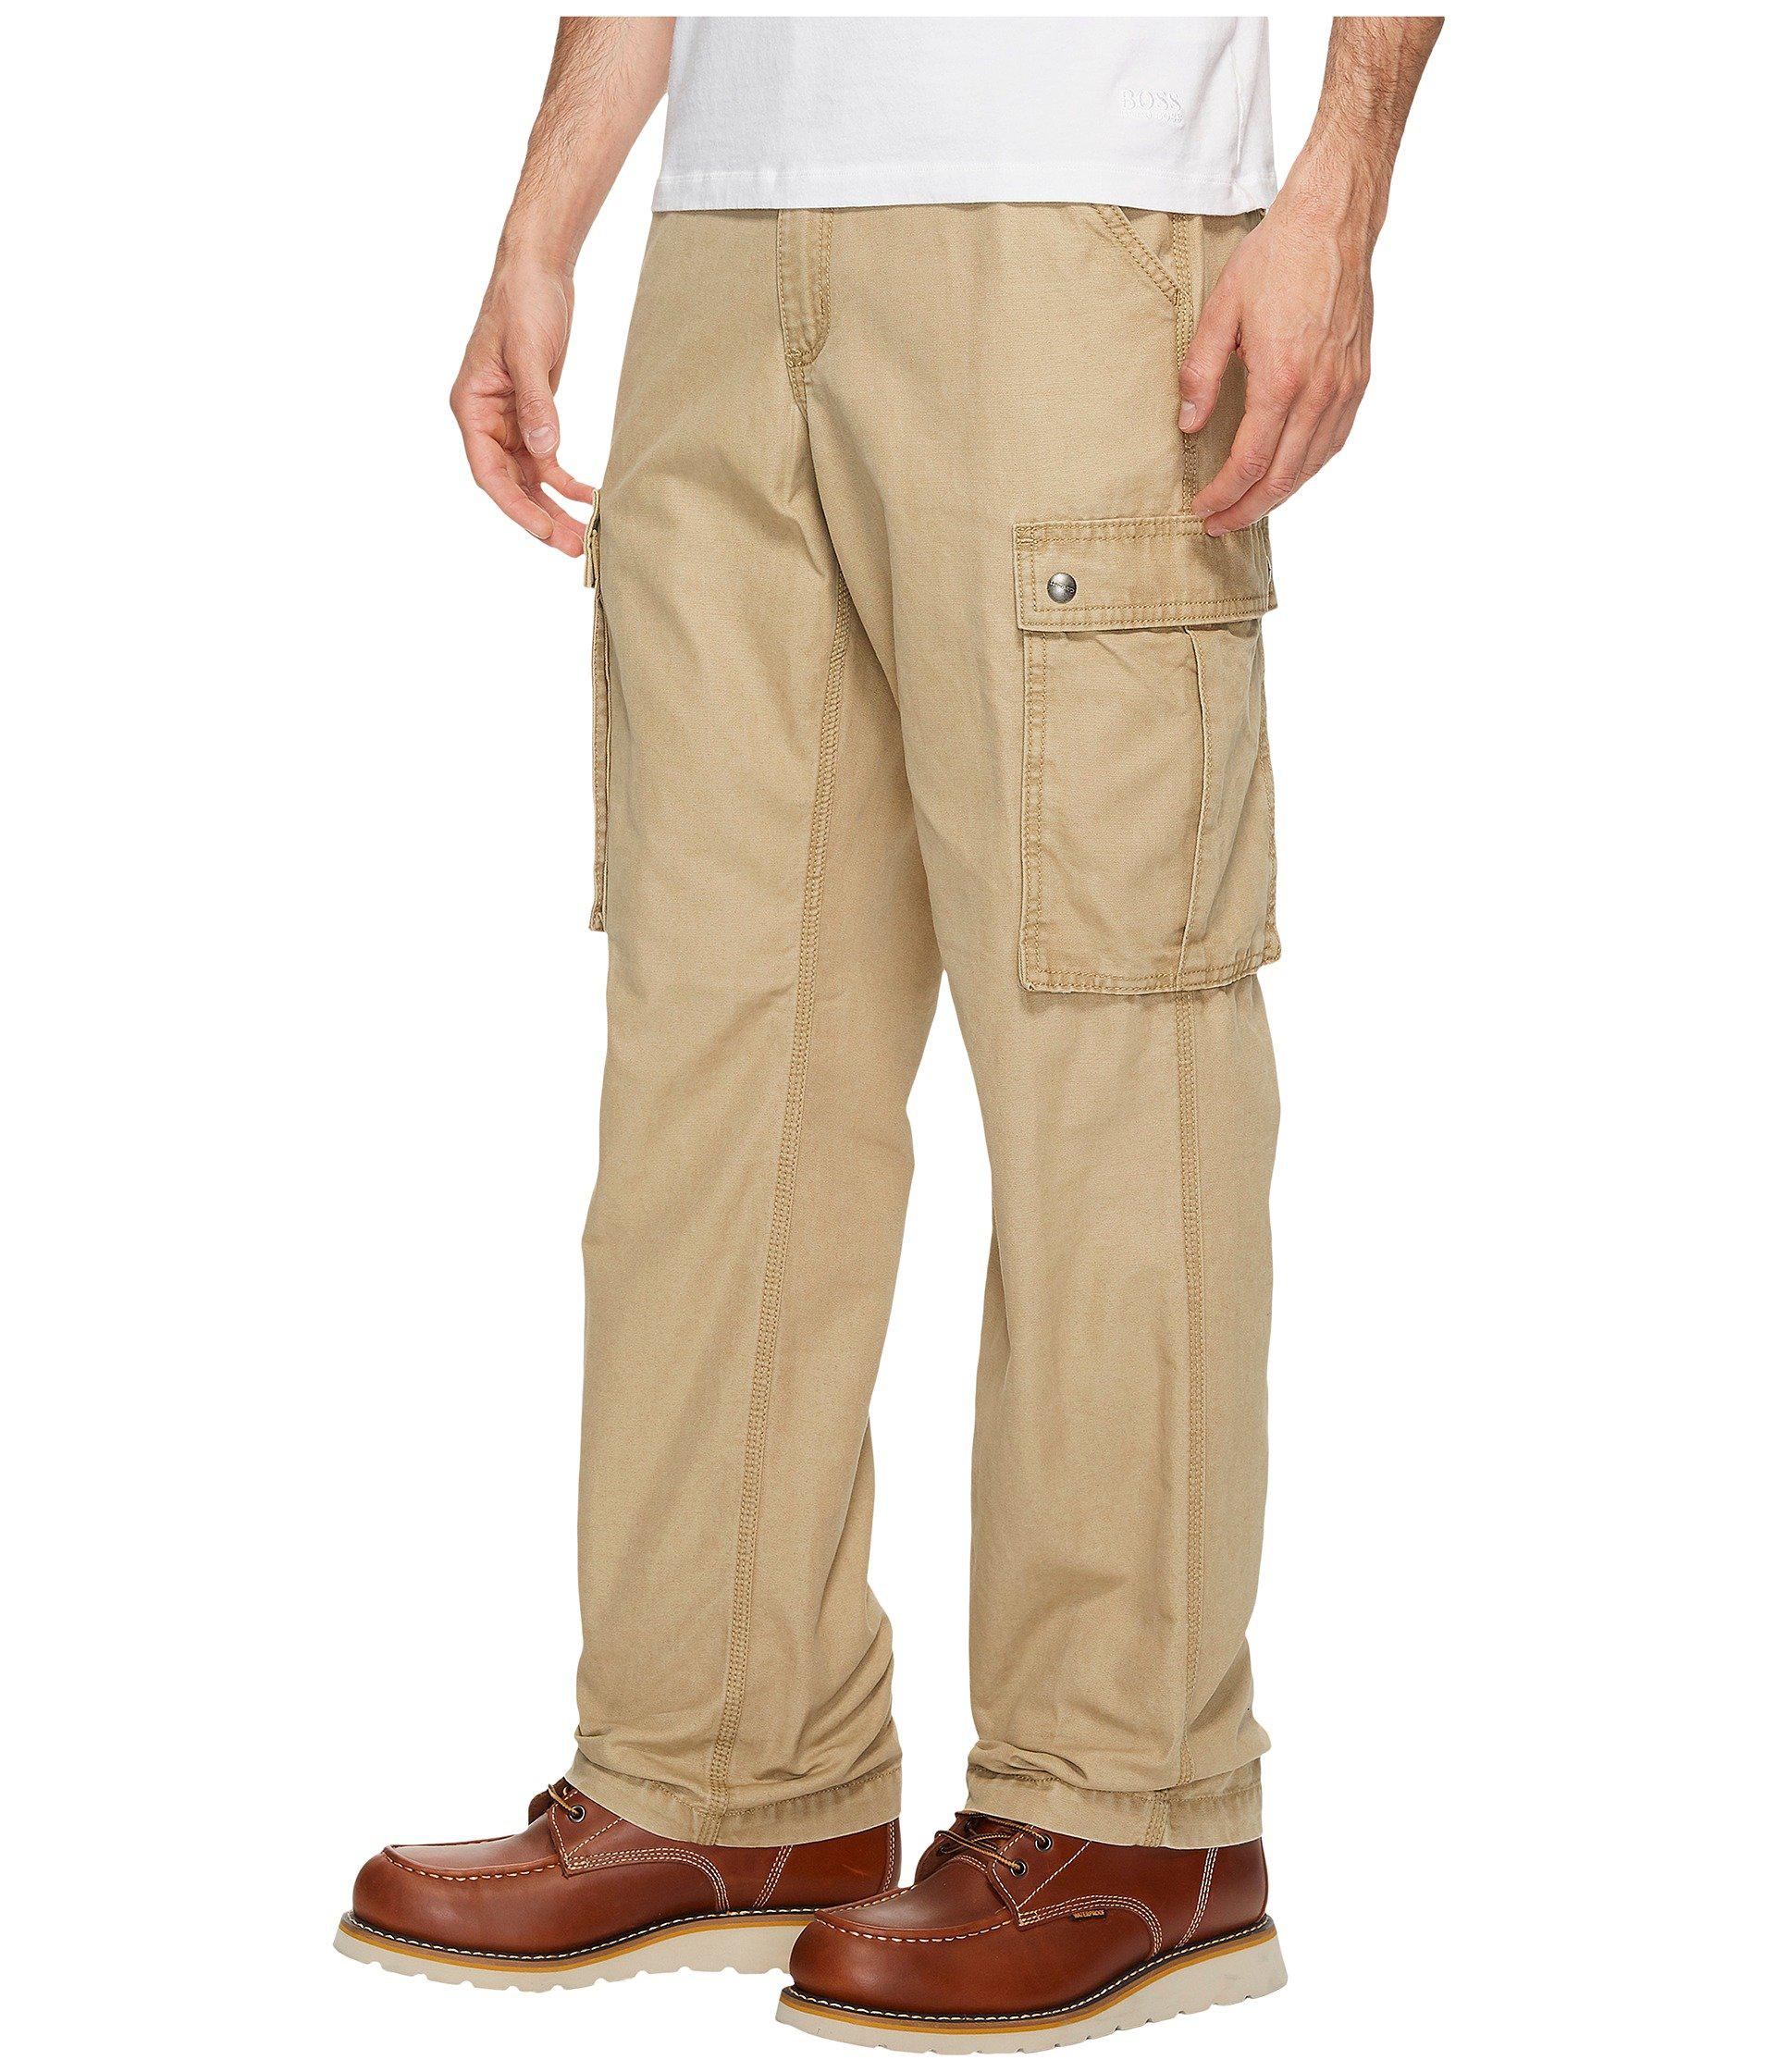 Carhartt Rugged Cargo Pant in Natural for Men - Lyst